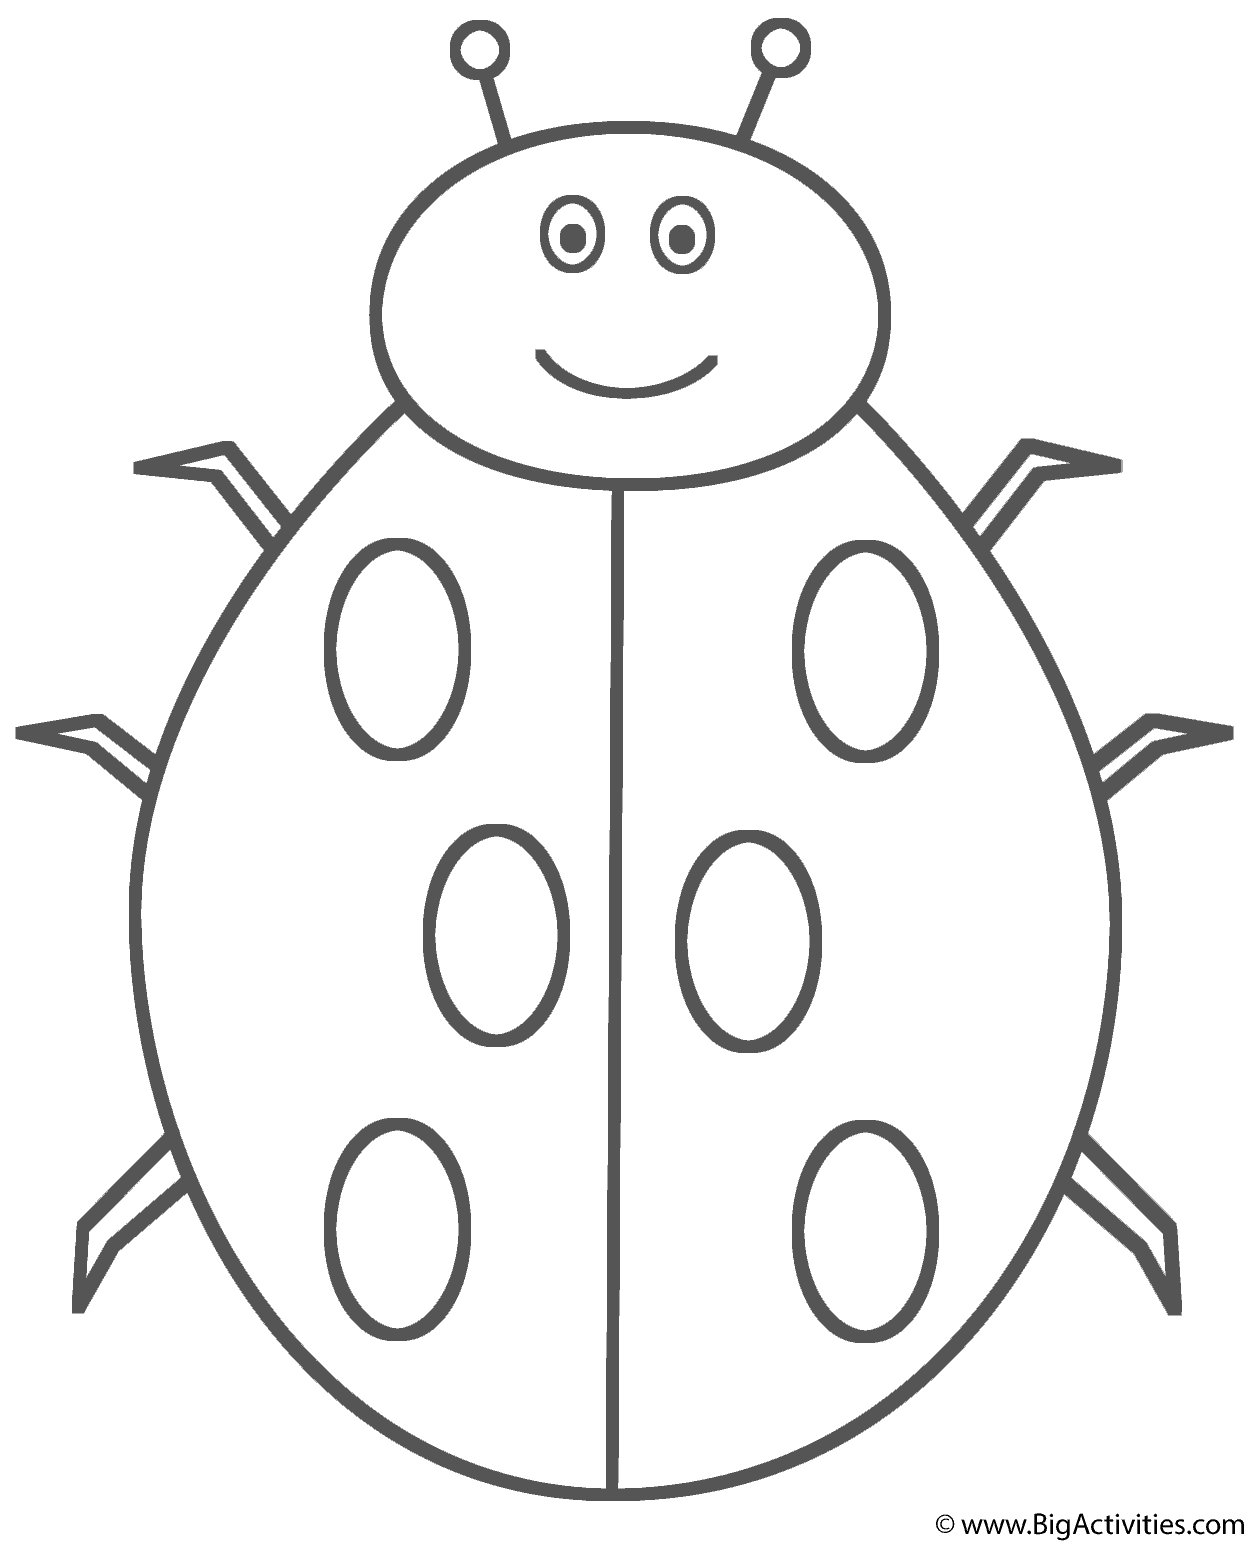 Ladybug Smiling Coloring Page (Insects)